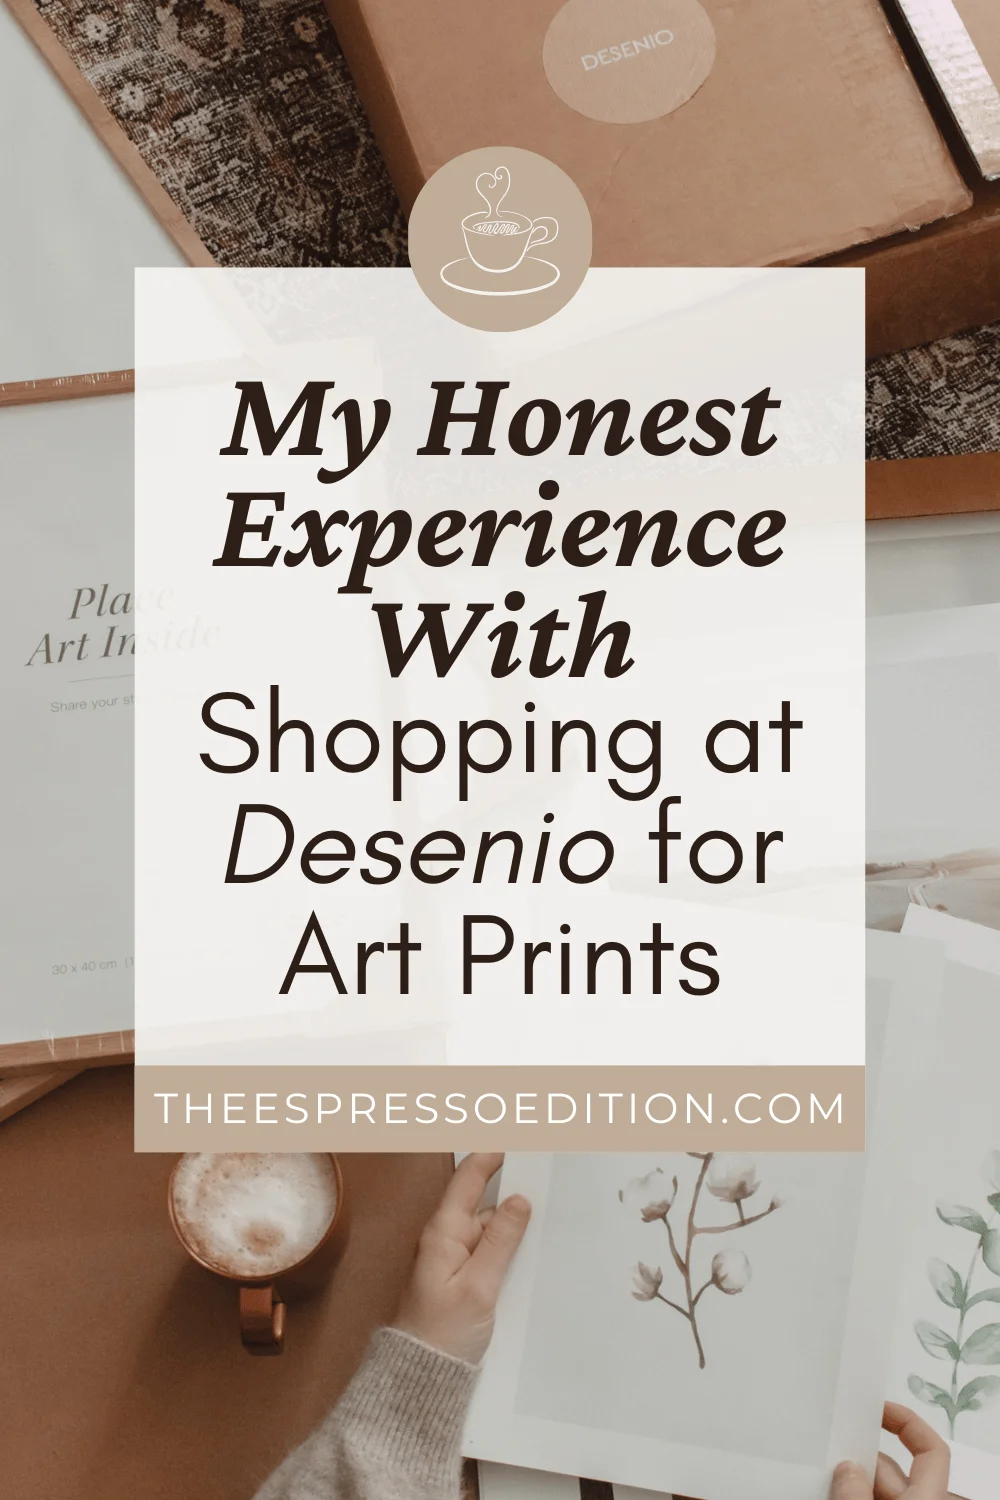 My Honest Experience With Shopping at Desenio for Art Prints by The Espresso Edition cozy book and lifestyle blog